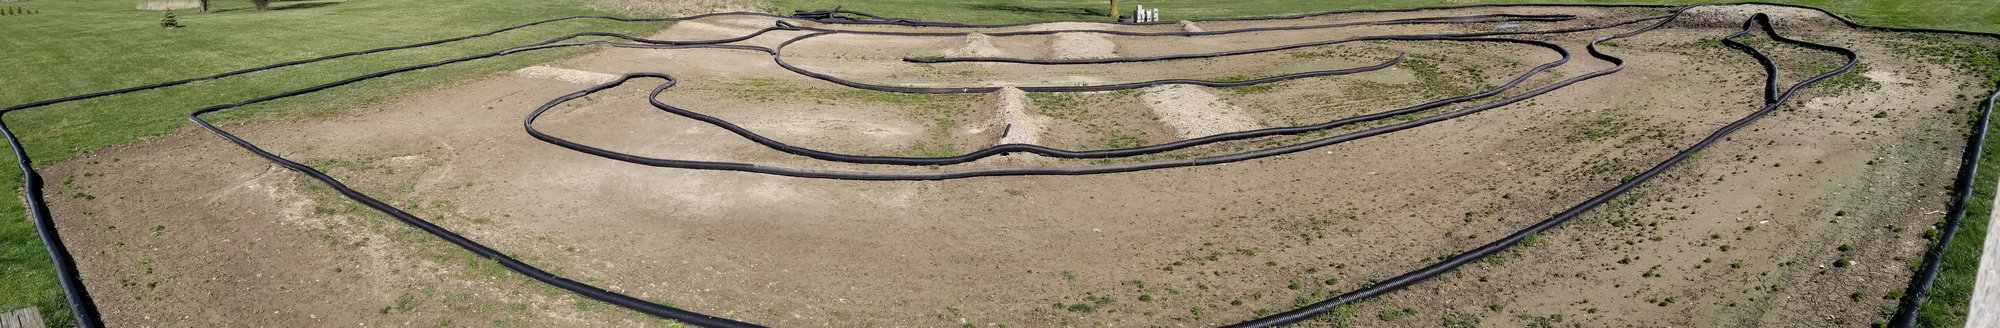 Backyard off-road track - Page 2 - R/C Tech Forums